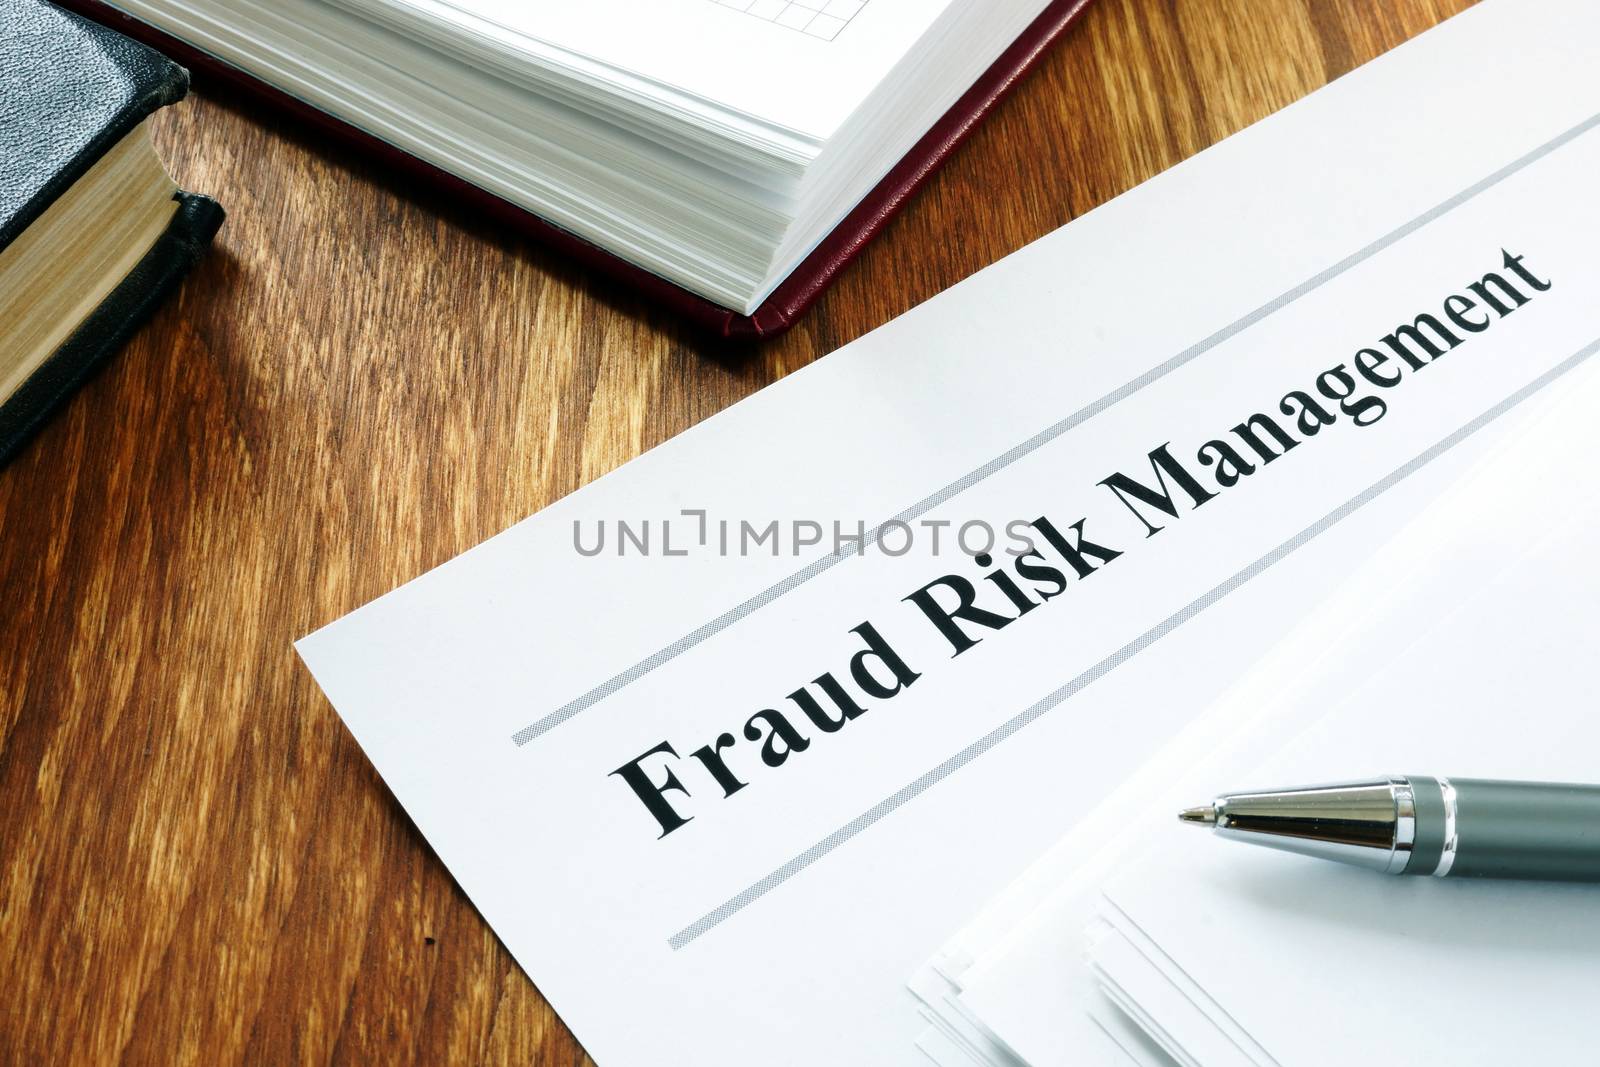 Documents about Fraud risk management and pen.